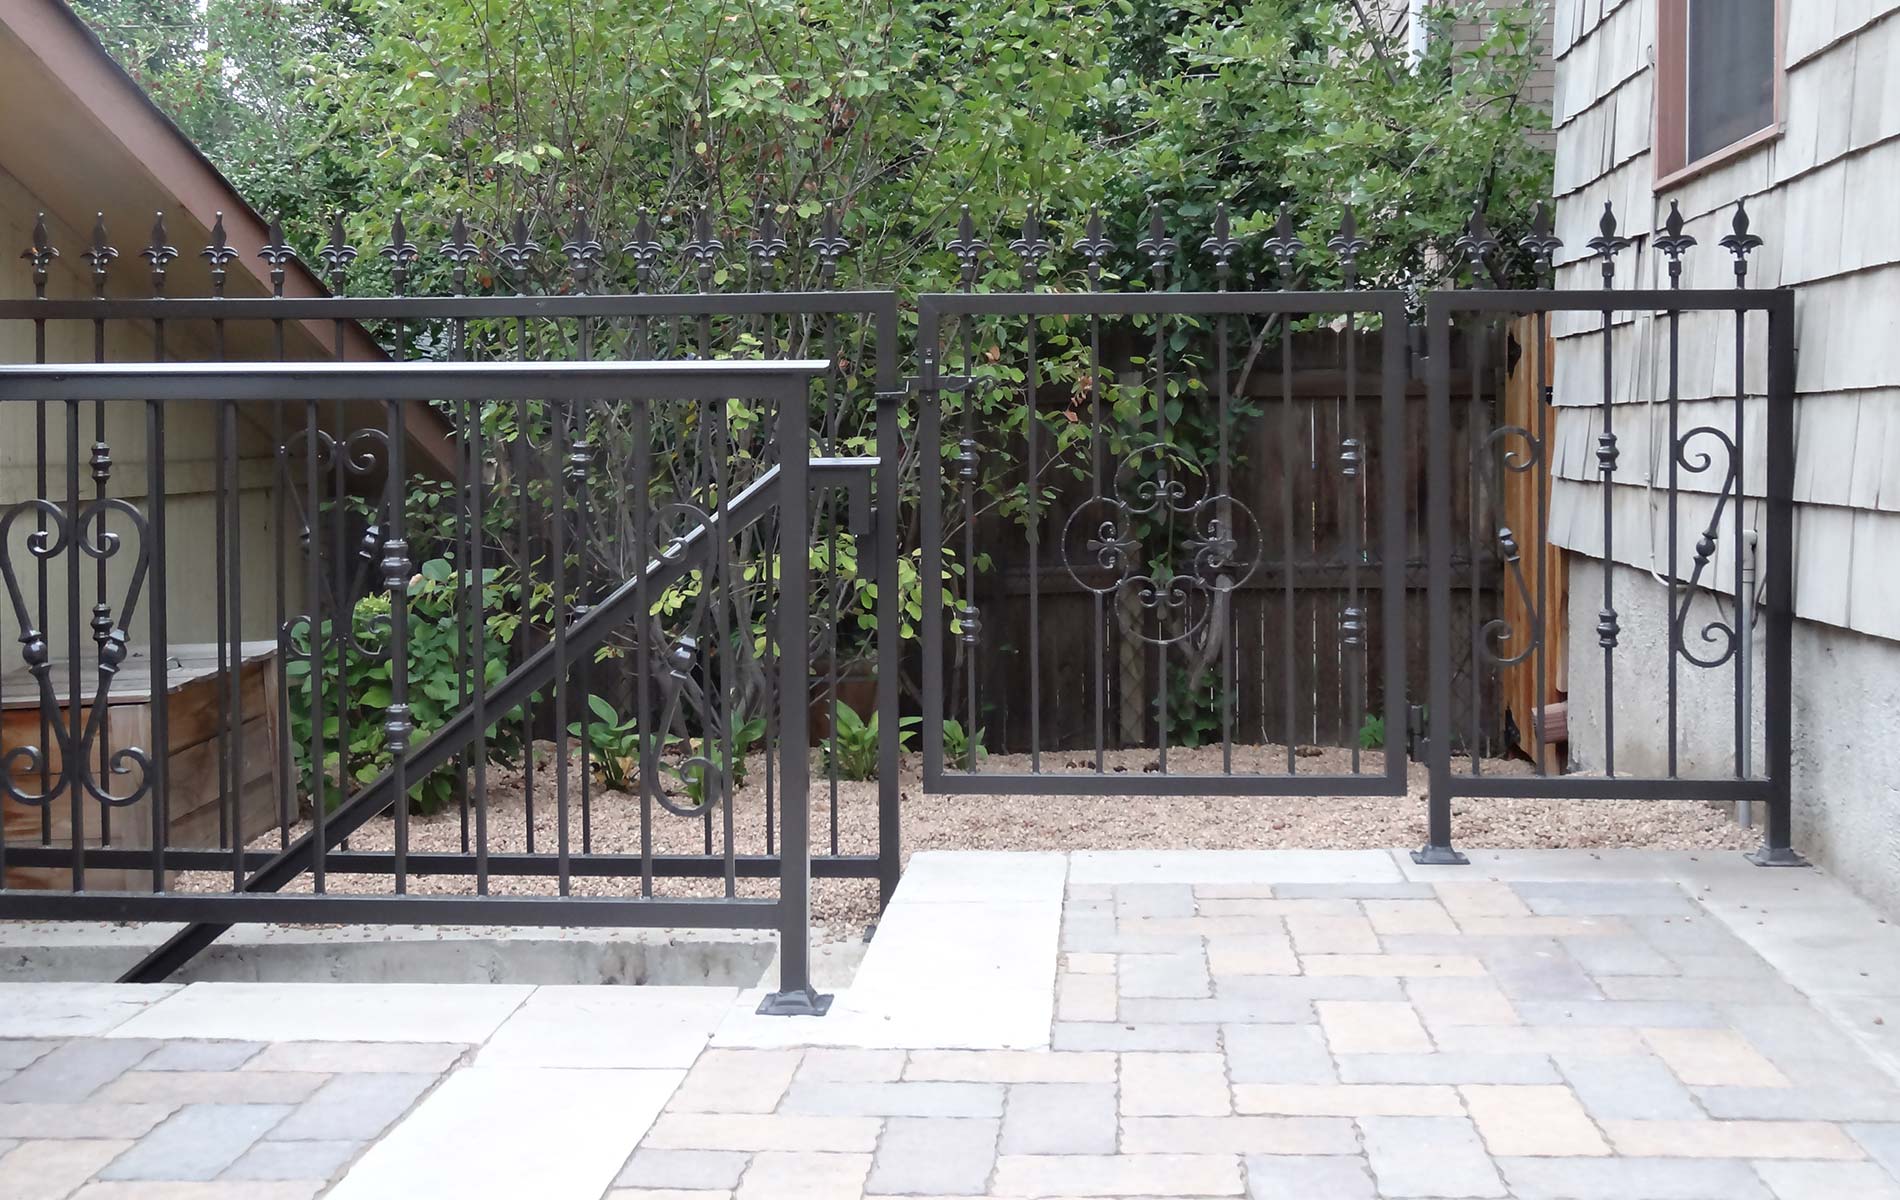 ornate metal guardrail accents this historic residence